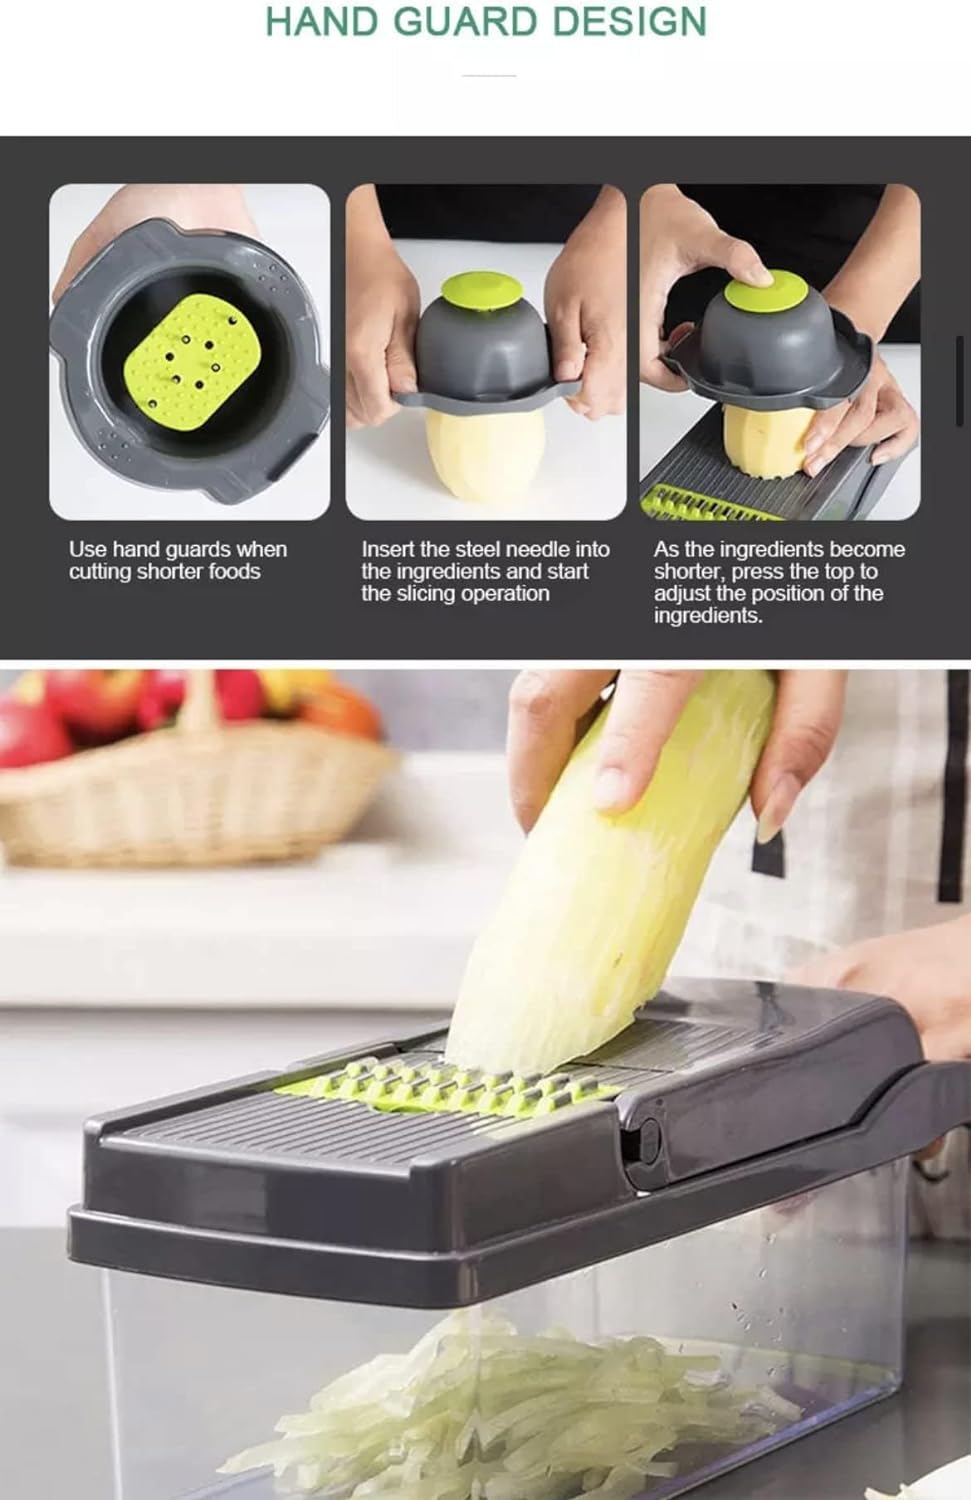 12 in 1 Mandoline Slicer, Heavy Duty Potato /Onion/ Food/ Veggie Chopper with Vegetable Peeler, Hand Guard and Container (Black)